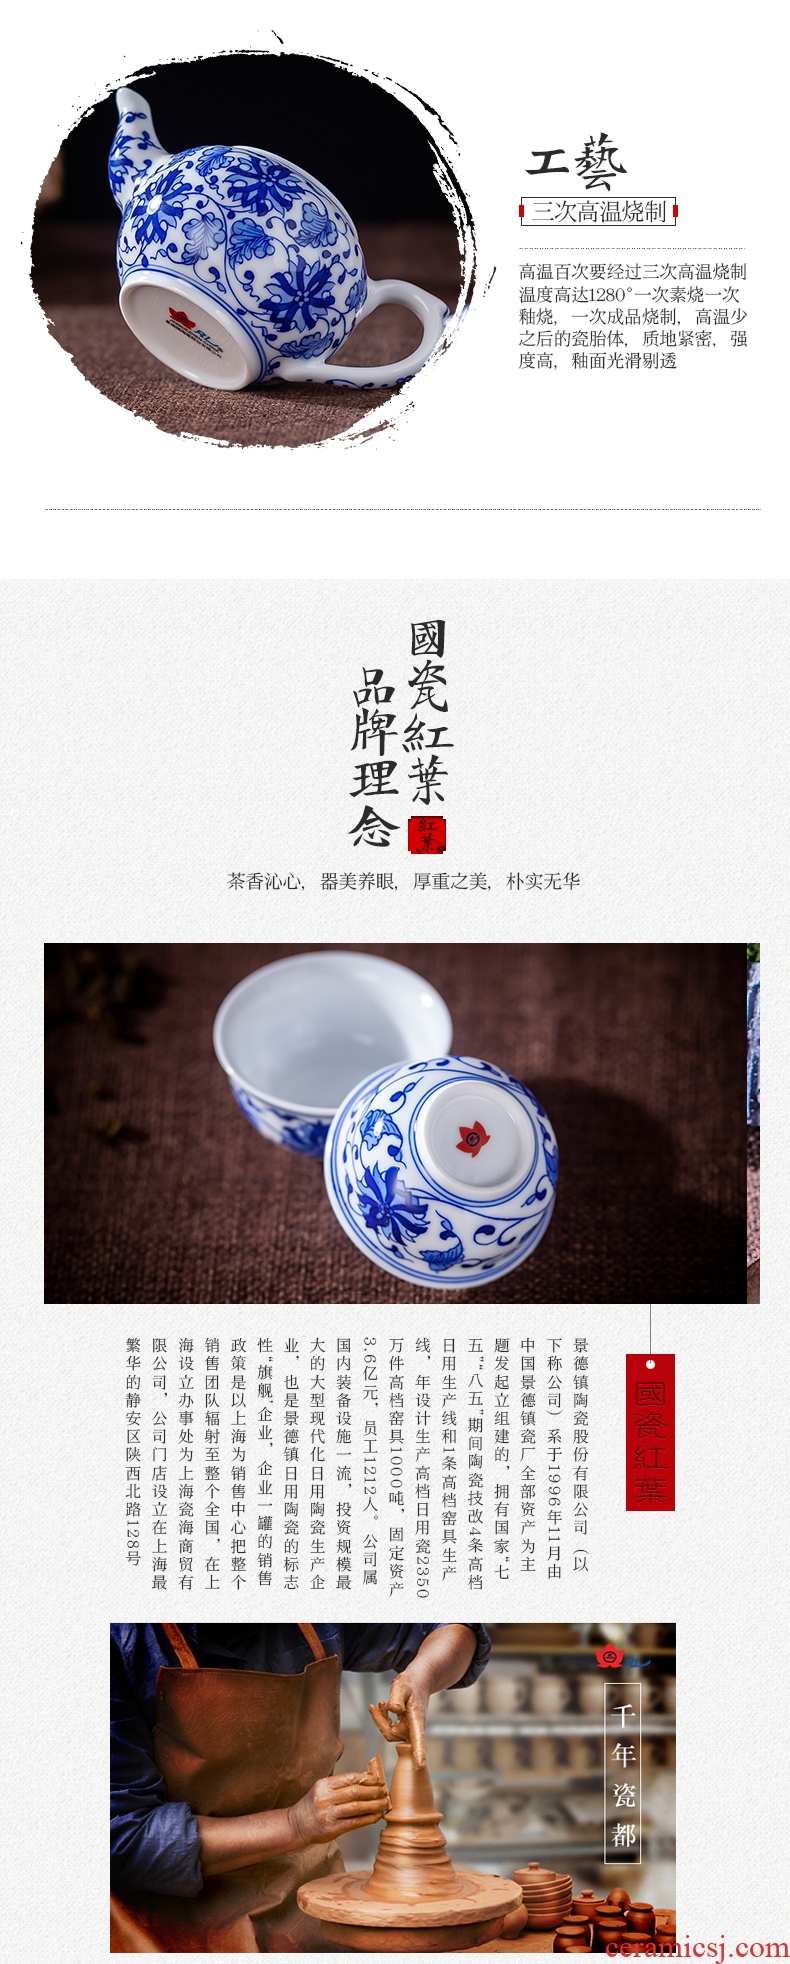 Red hand Chinese jingdezhen ceramics kung fu tea set 8 head home outfit bound branch lotus tea gifts